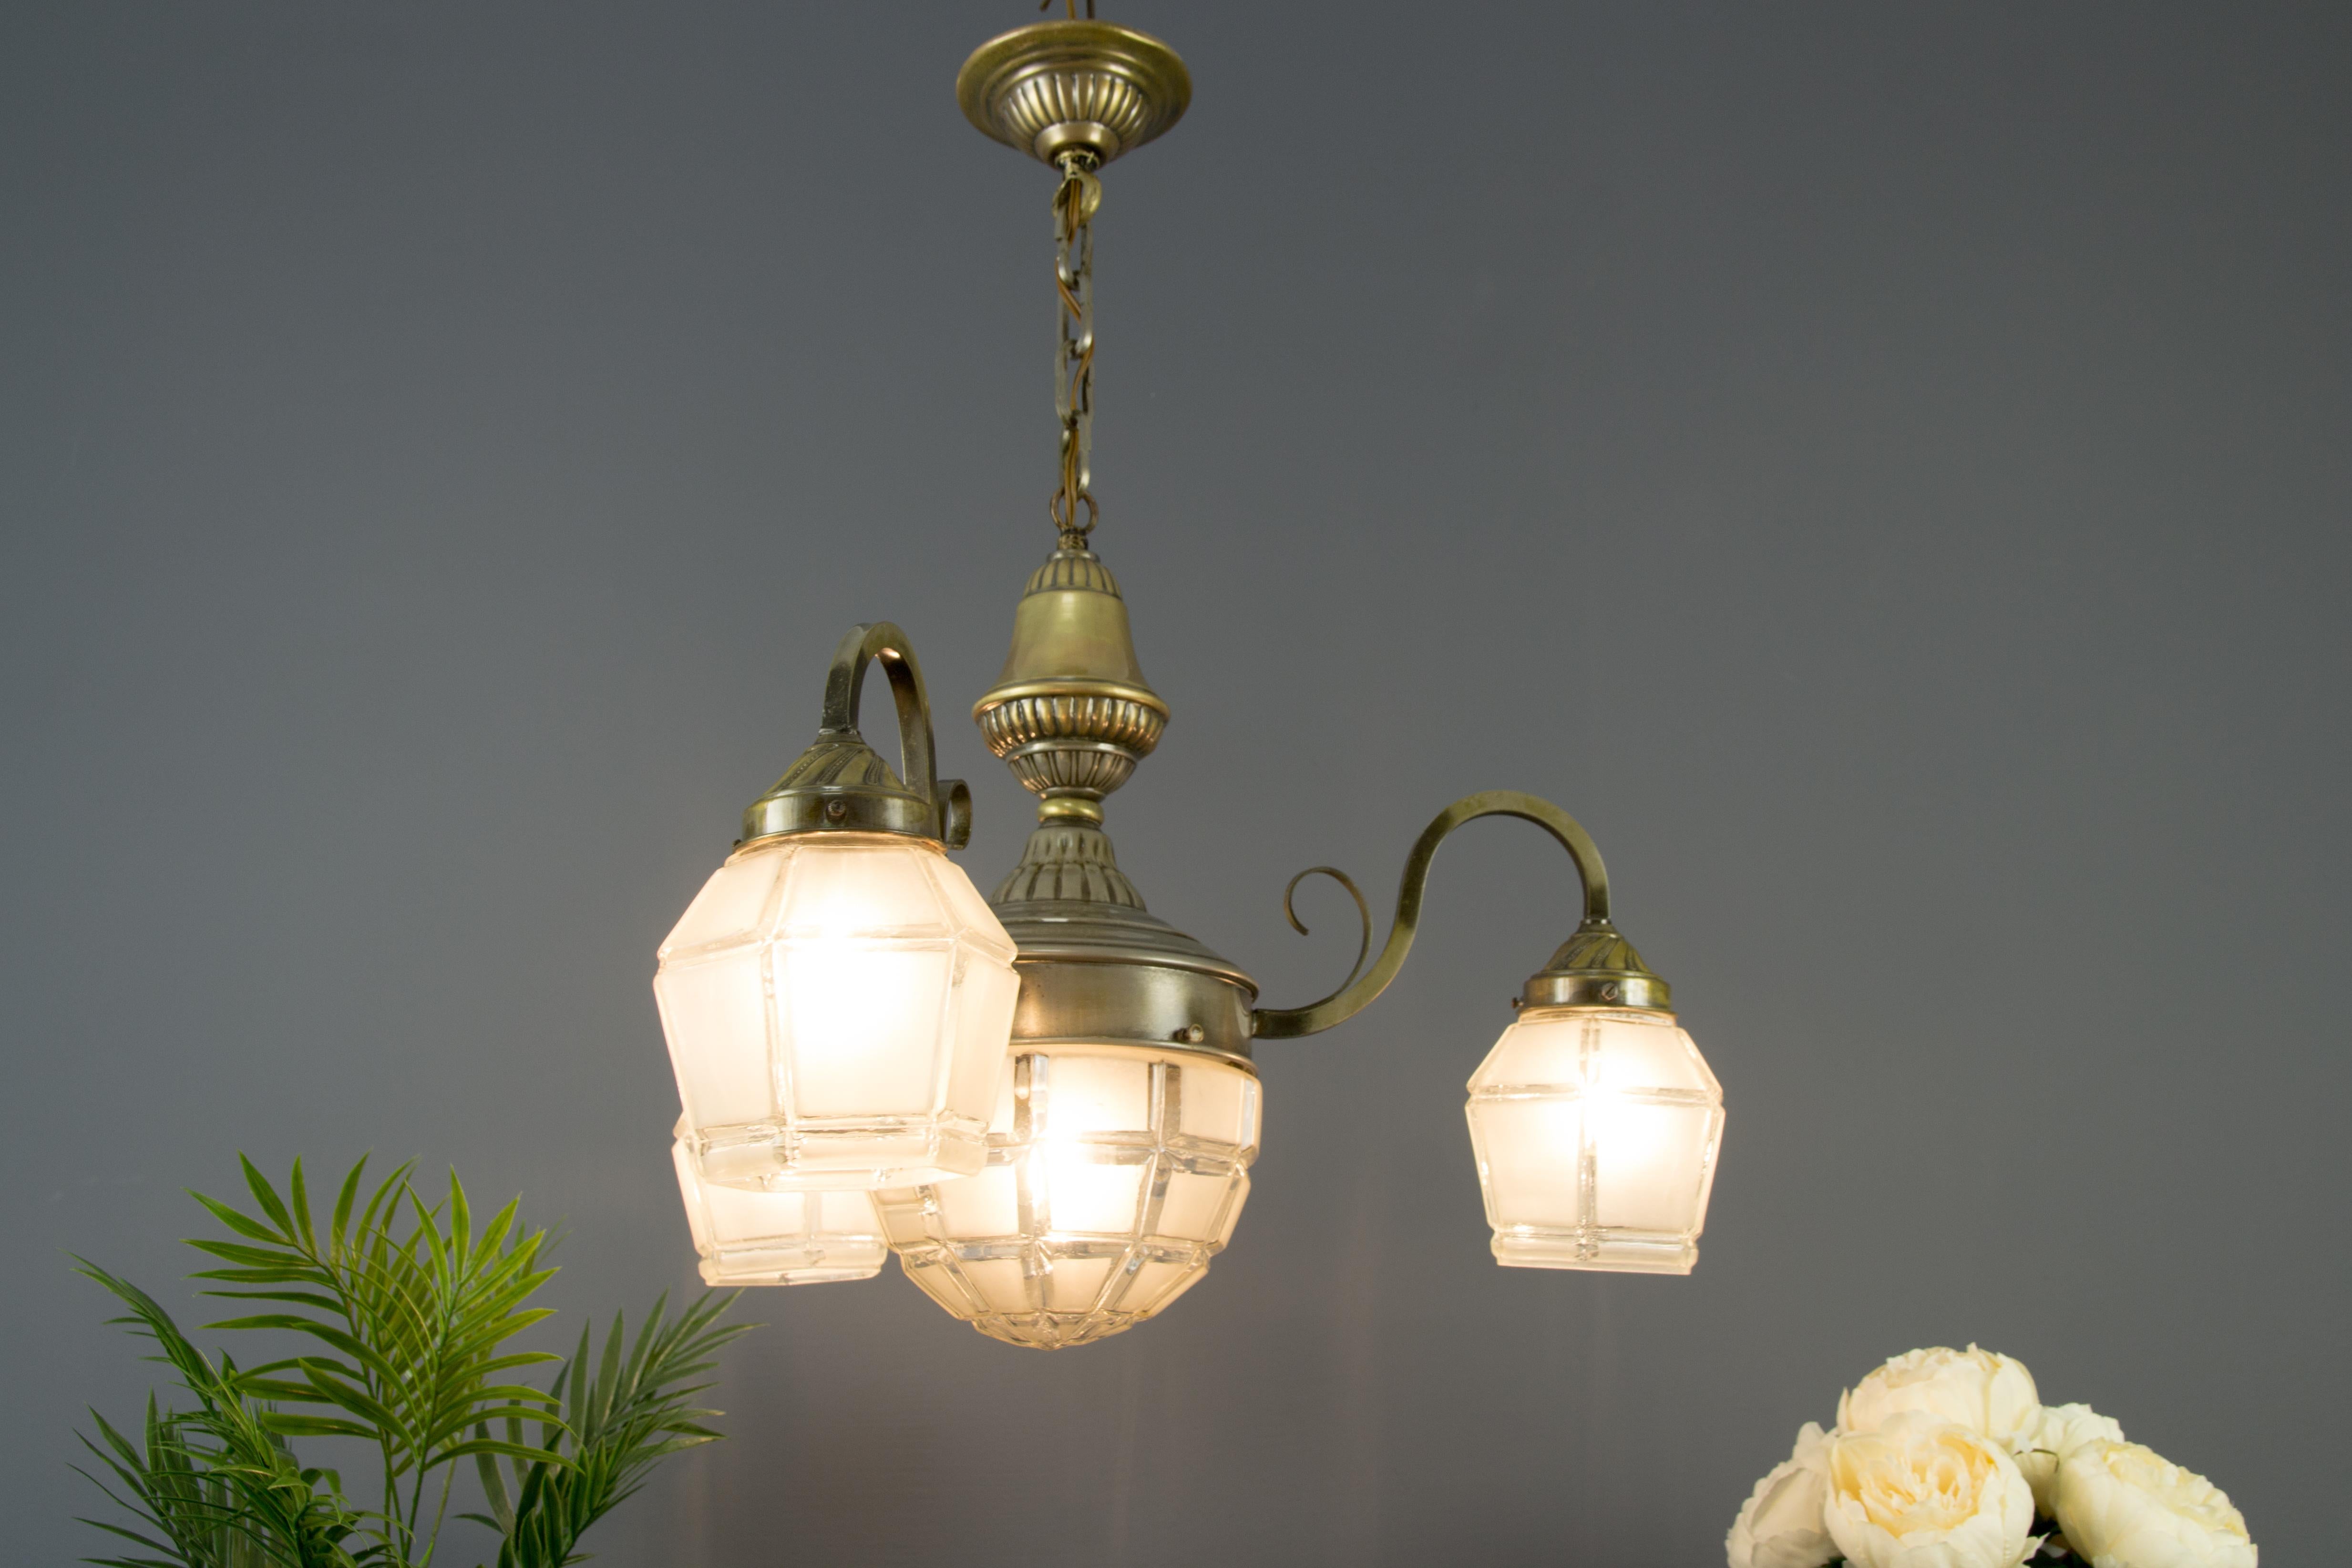 An elegant French Art Deco chandelier from the 1930s. Three brass arms, each with a white frosted glass shade, and one socket for the E 27 light bulb. The bottom is centered with a frosted glass bowl and one socket for the E 27-size (E26) light